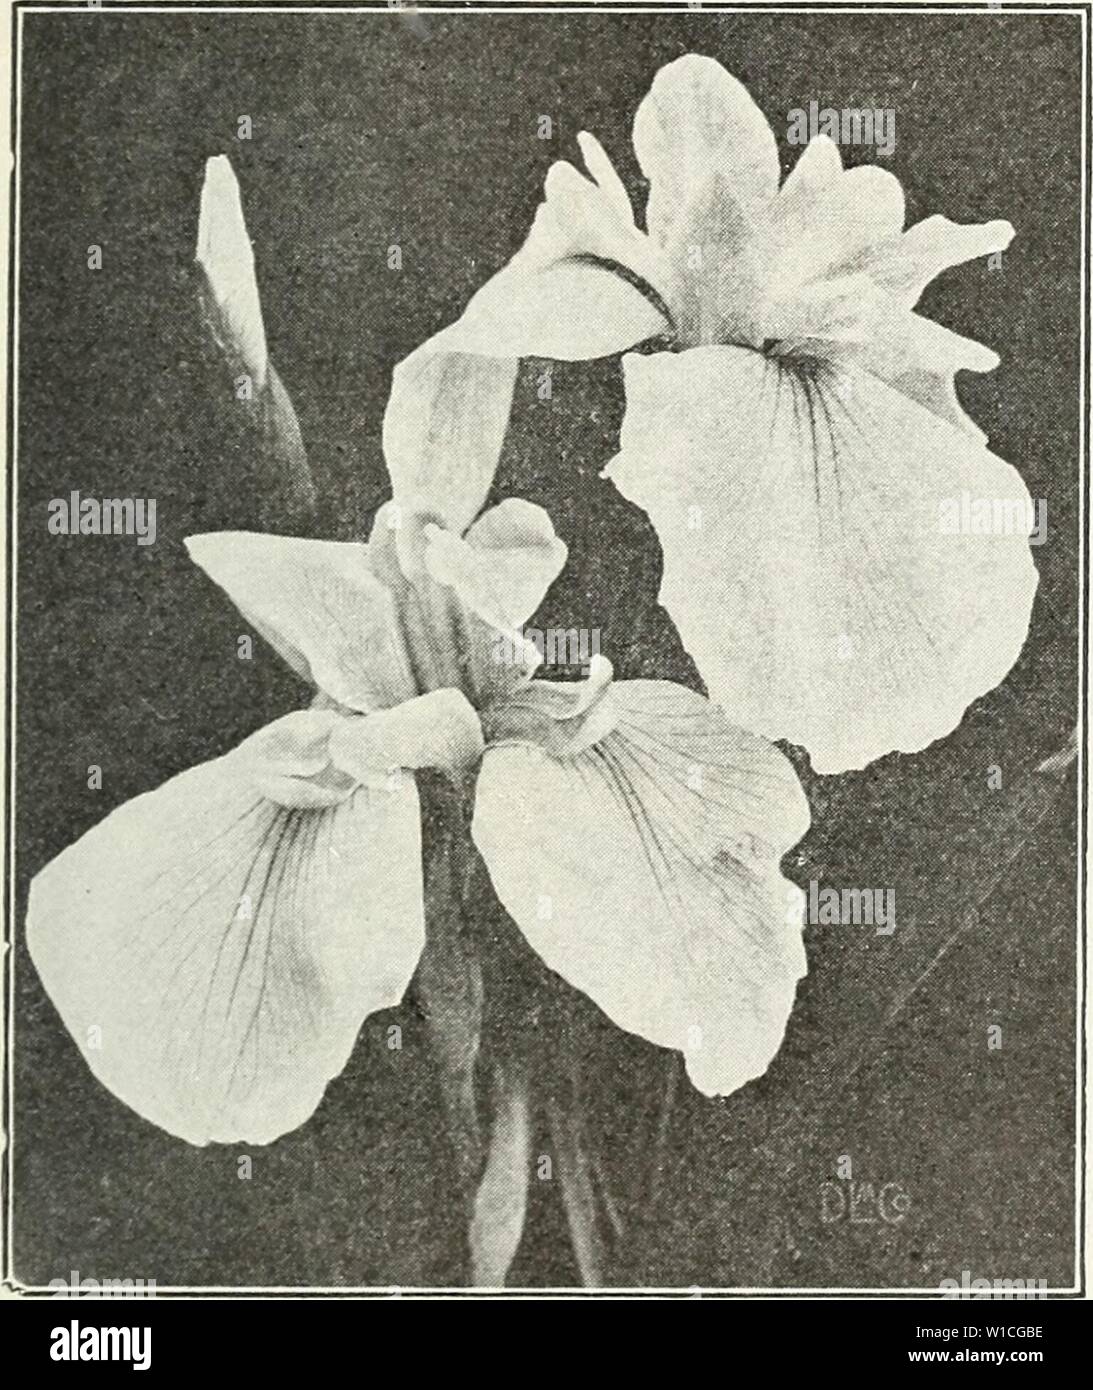 Archive image from page 64 of Descriptive catalogue of vegetable and. Descriptive catalogue of vegetable and flower seeds . descriptivecatal1926john Year: 1926  Lilium Auratum (Goldbanded Lily) HARDY LILIES auratum (Goldbanded Lily). Pure white, spotted crimson, each petal marked in the center with a band of yellow. Flowers in August; delightfully fragrant. Mammoth bulbs, 9 to 11 in. cir. Ea. 50c., doz. $5.00. speciosum album. The best flowering pure white, hardy garden lily; of easv culture. Mammoth bulbs. 9 to 11 in.'cir. Ea. 65c., doz. S6.50. Monster bulbs, 10 to 12 in. cir. Ea. 80c., doz. Stock Photo